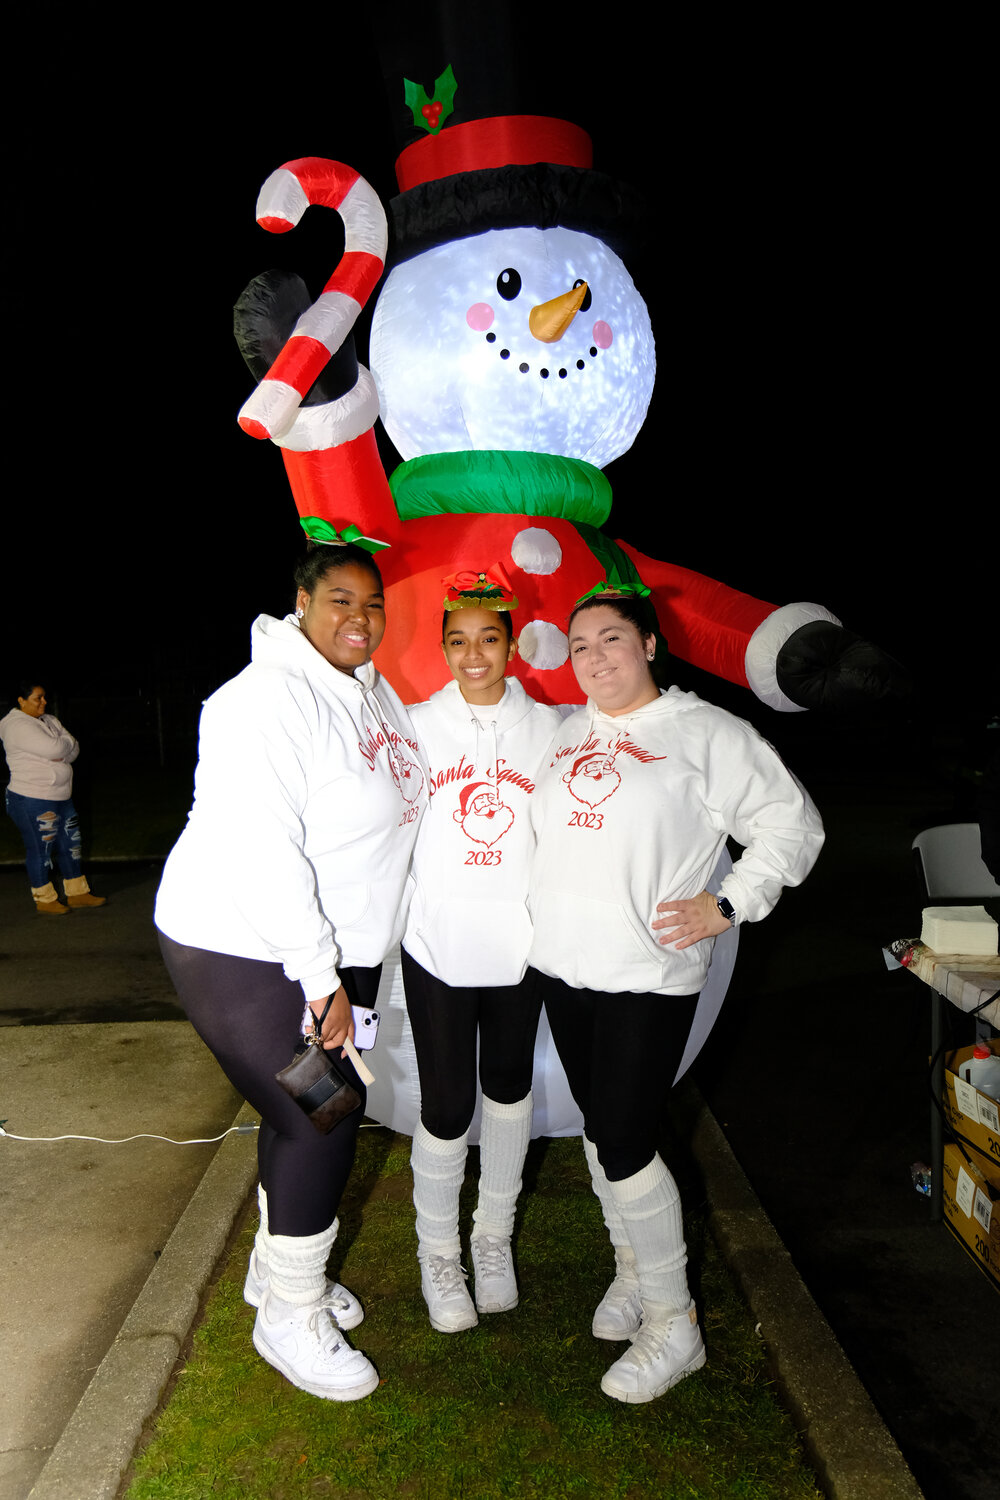 Sarah Jean-Francois, 17, Ariana Polizzo, 17, and Jolie Rannarine , 17 of Tip Tap Toe Dance Studio are all smiles with a snowman at the tree lighting ceremony hosted in Garden City South Park last weekend.